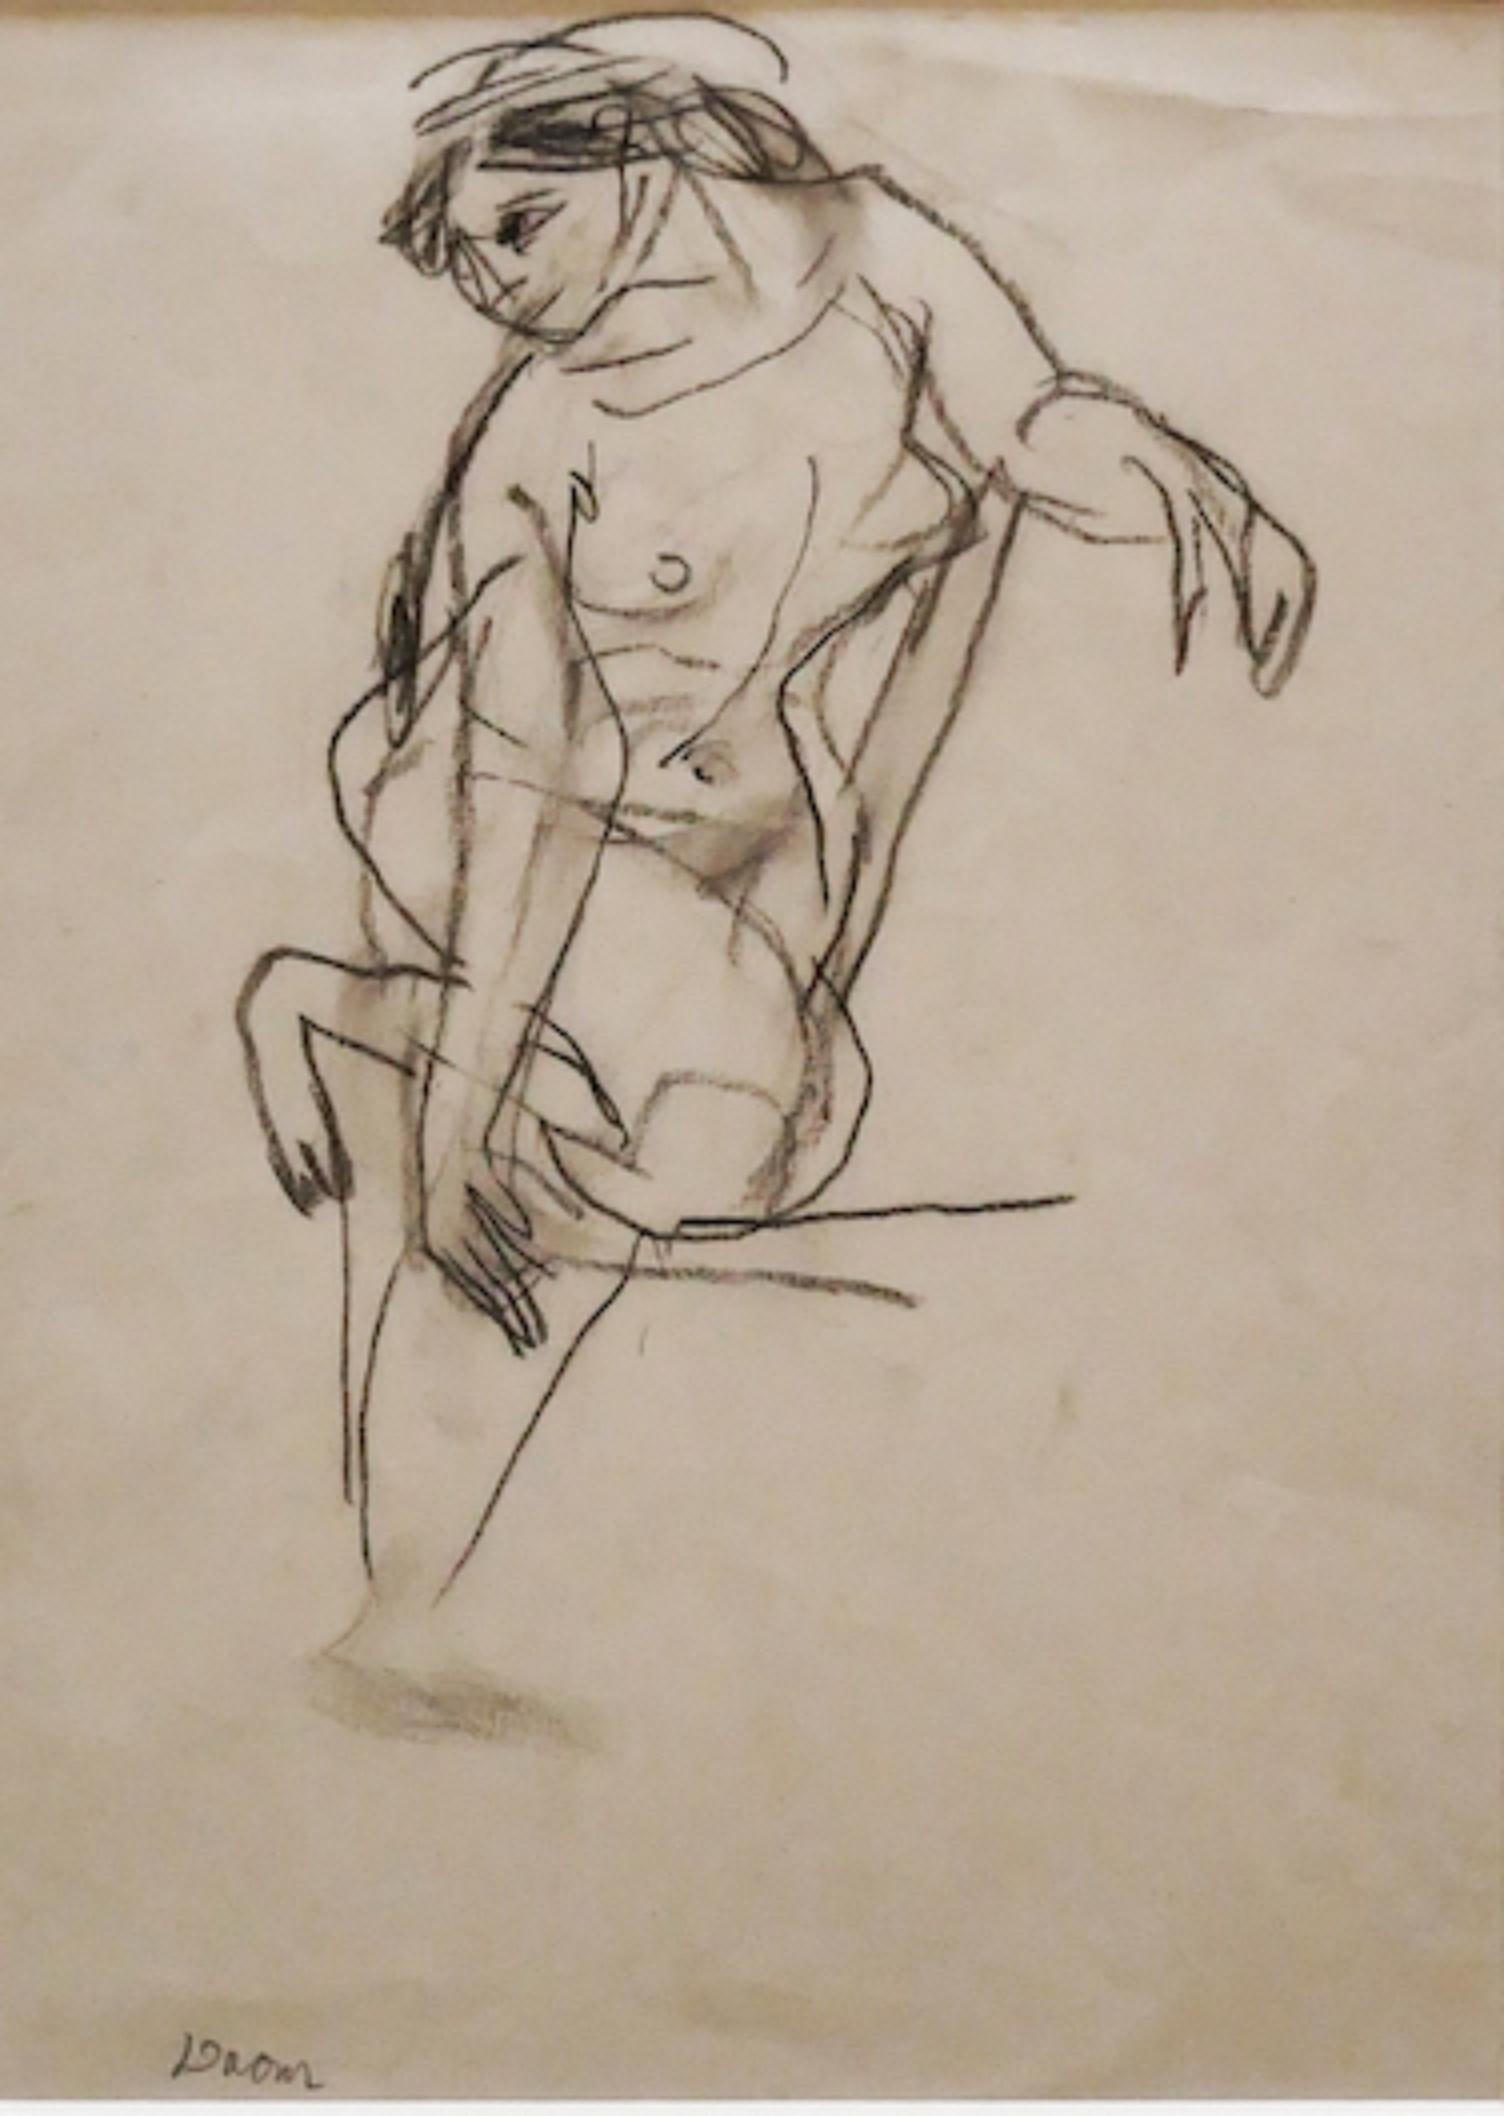 Nude Women - Original Drawing in Pencil by Jeanne Daour - Mid-20th Century